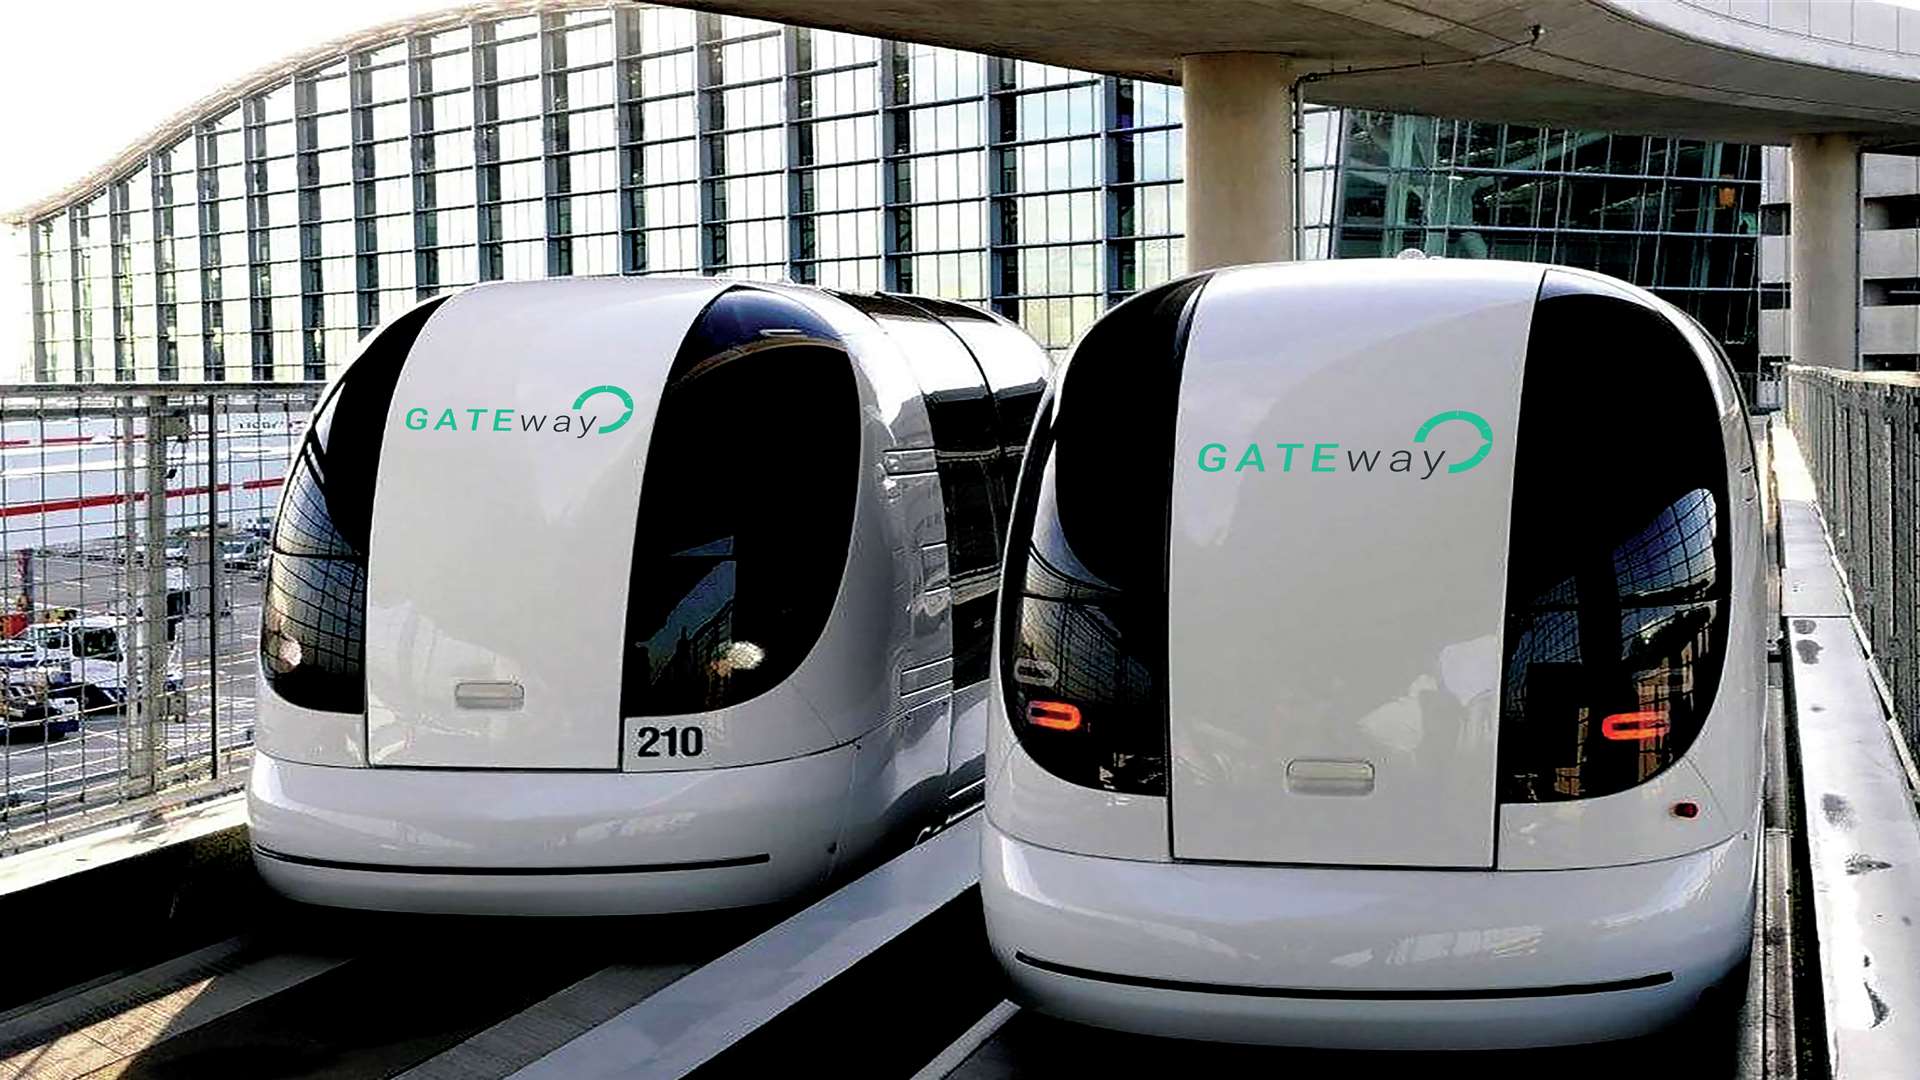 The pods could be based on those currently used at Heathrow Airport. Picture: Heathrow Airport